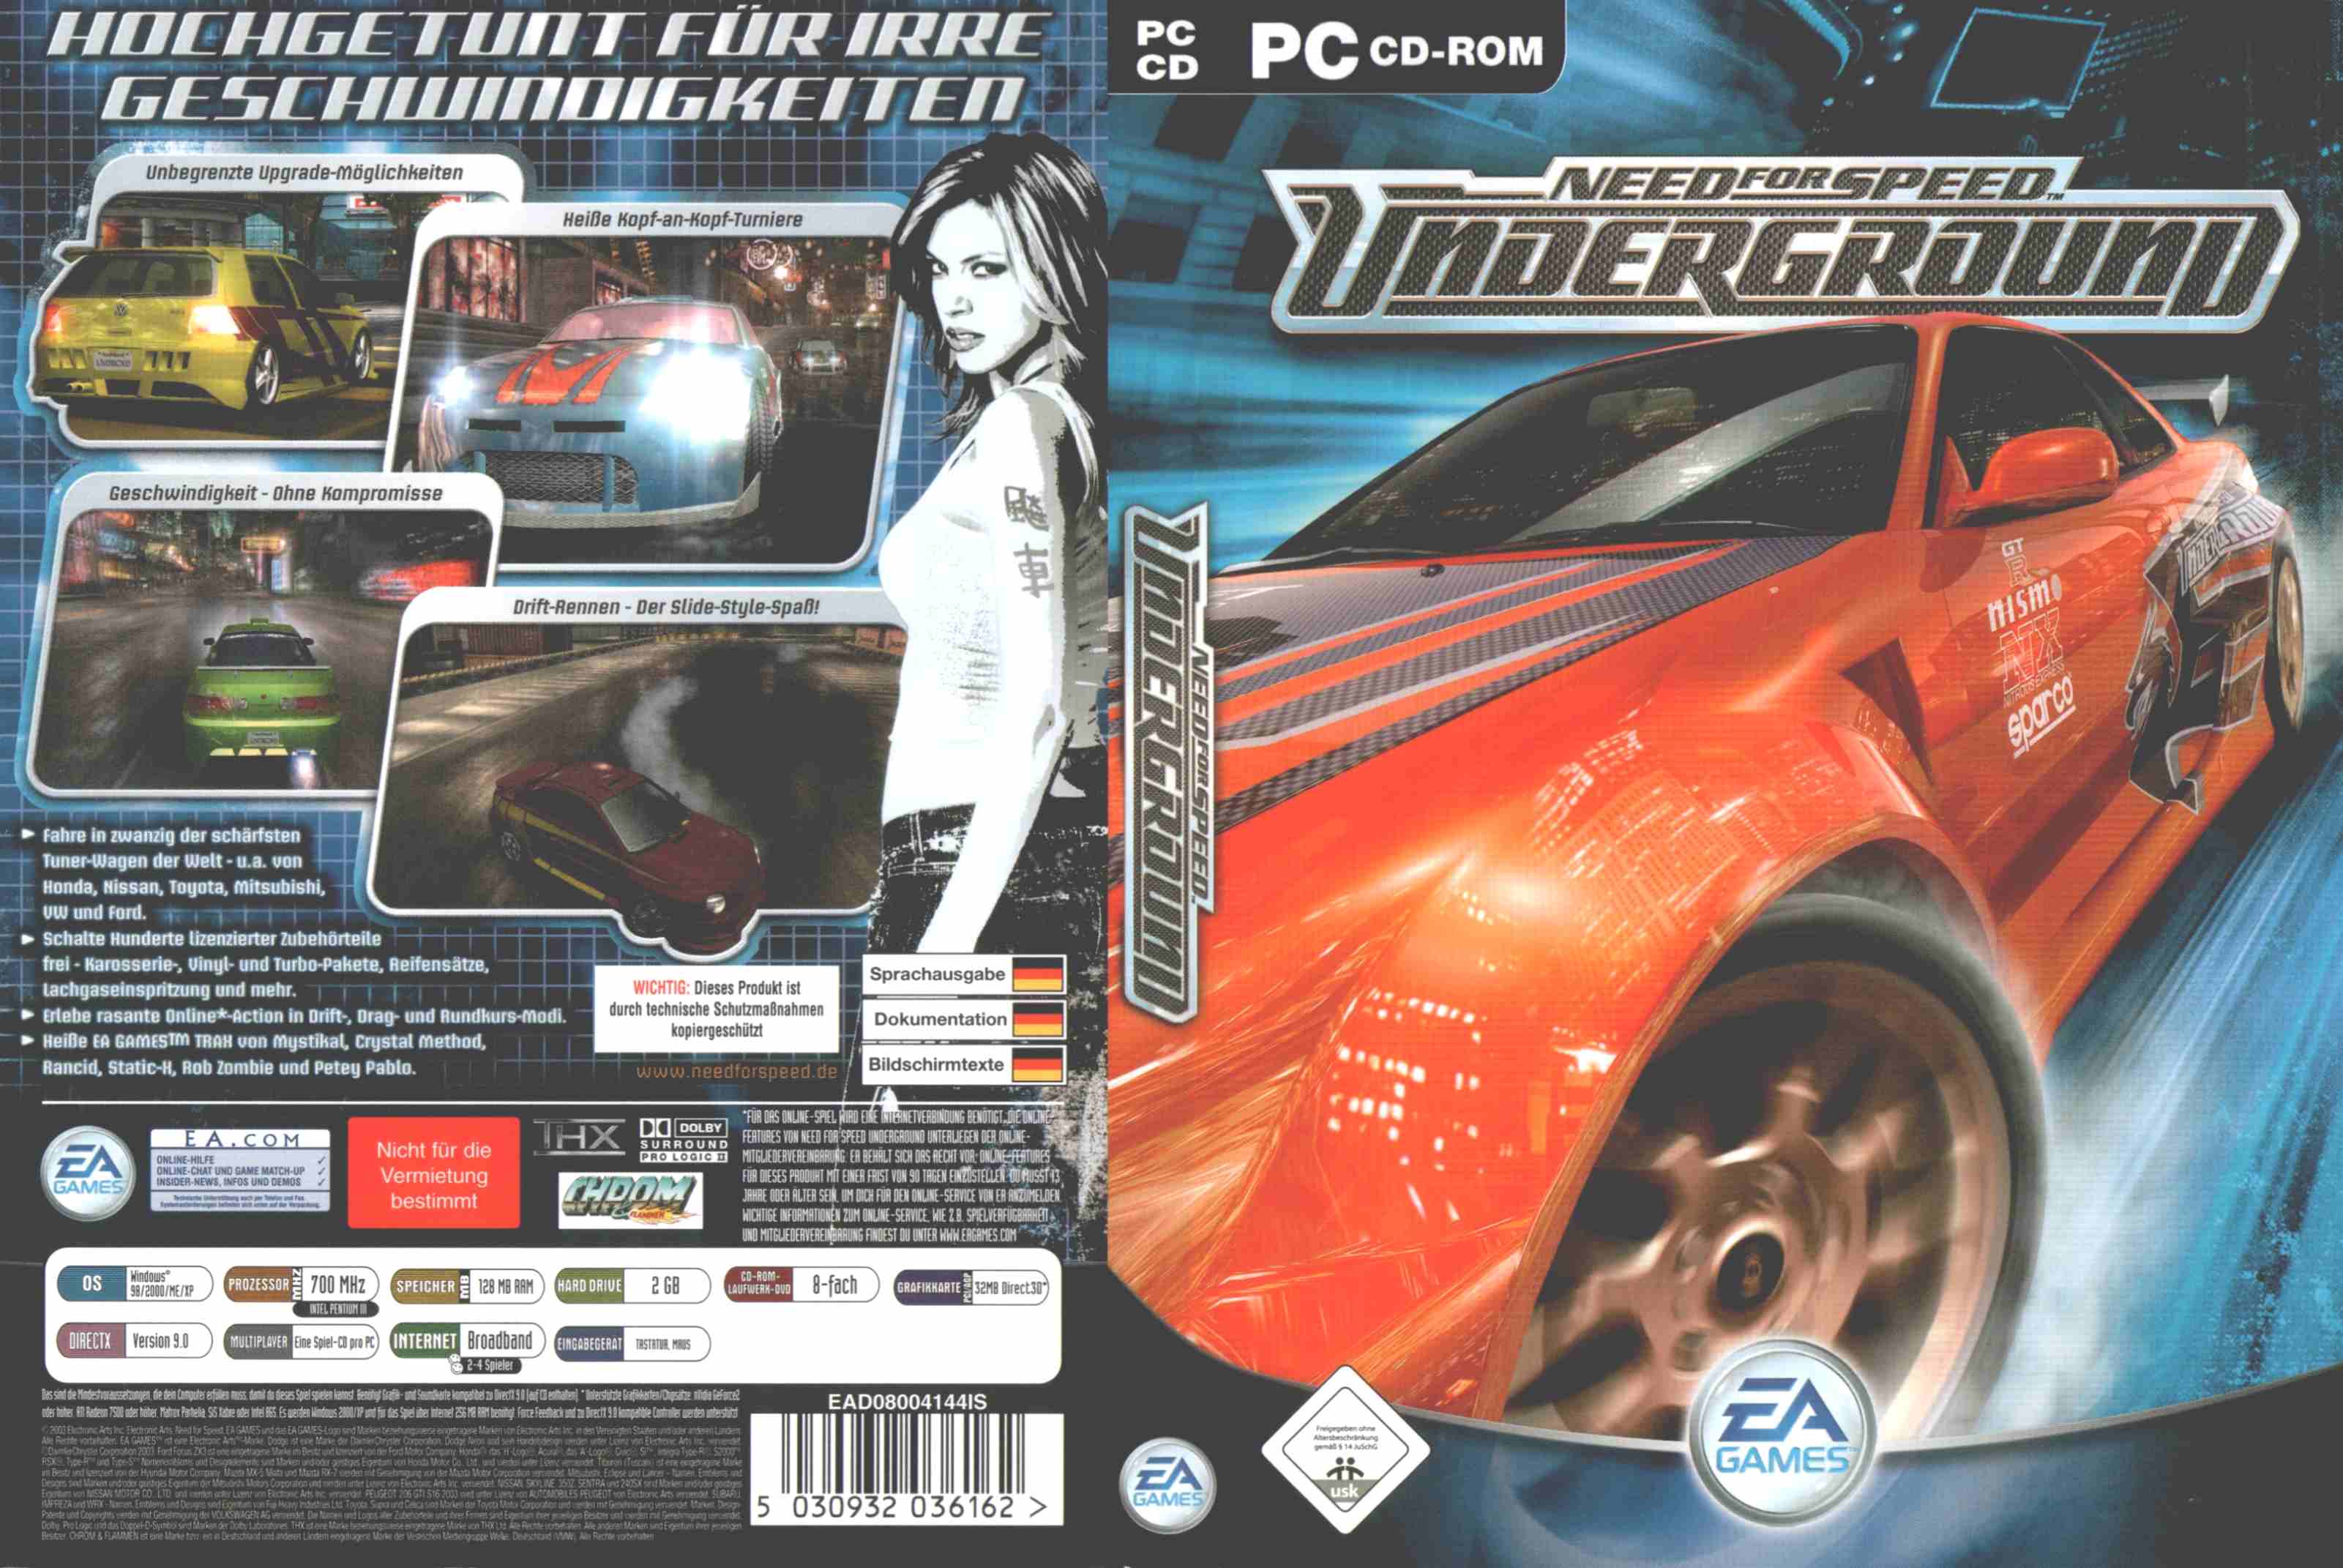 Песни из игры need for. Need for Speed Underground диск. Need for Speed Underground 2 диск PC. NFS Underground 1 диски. Need for Speed 2003 обложка.